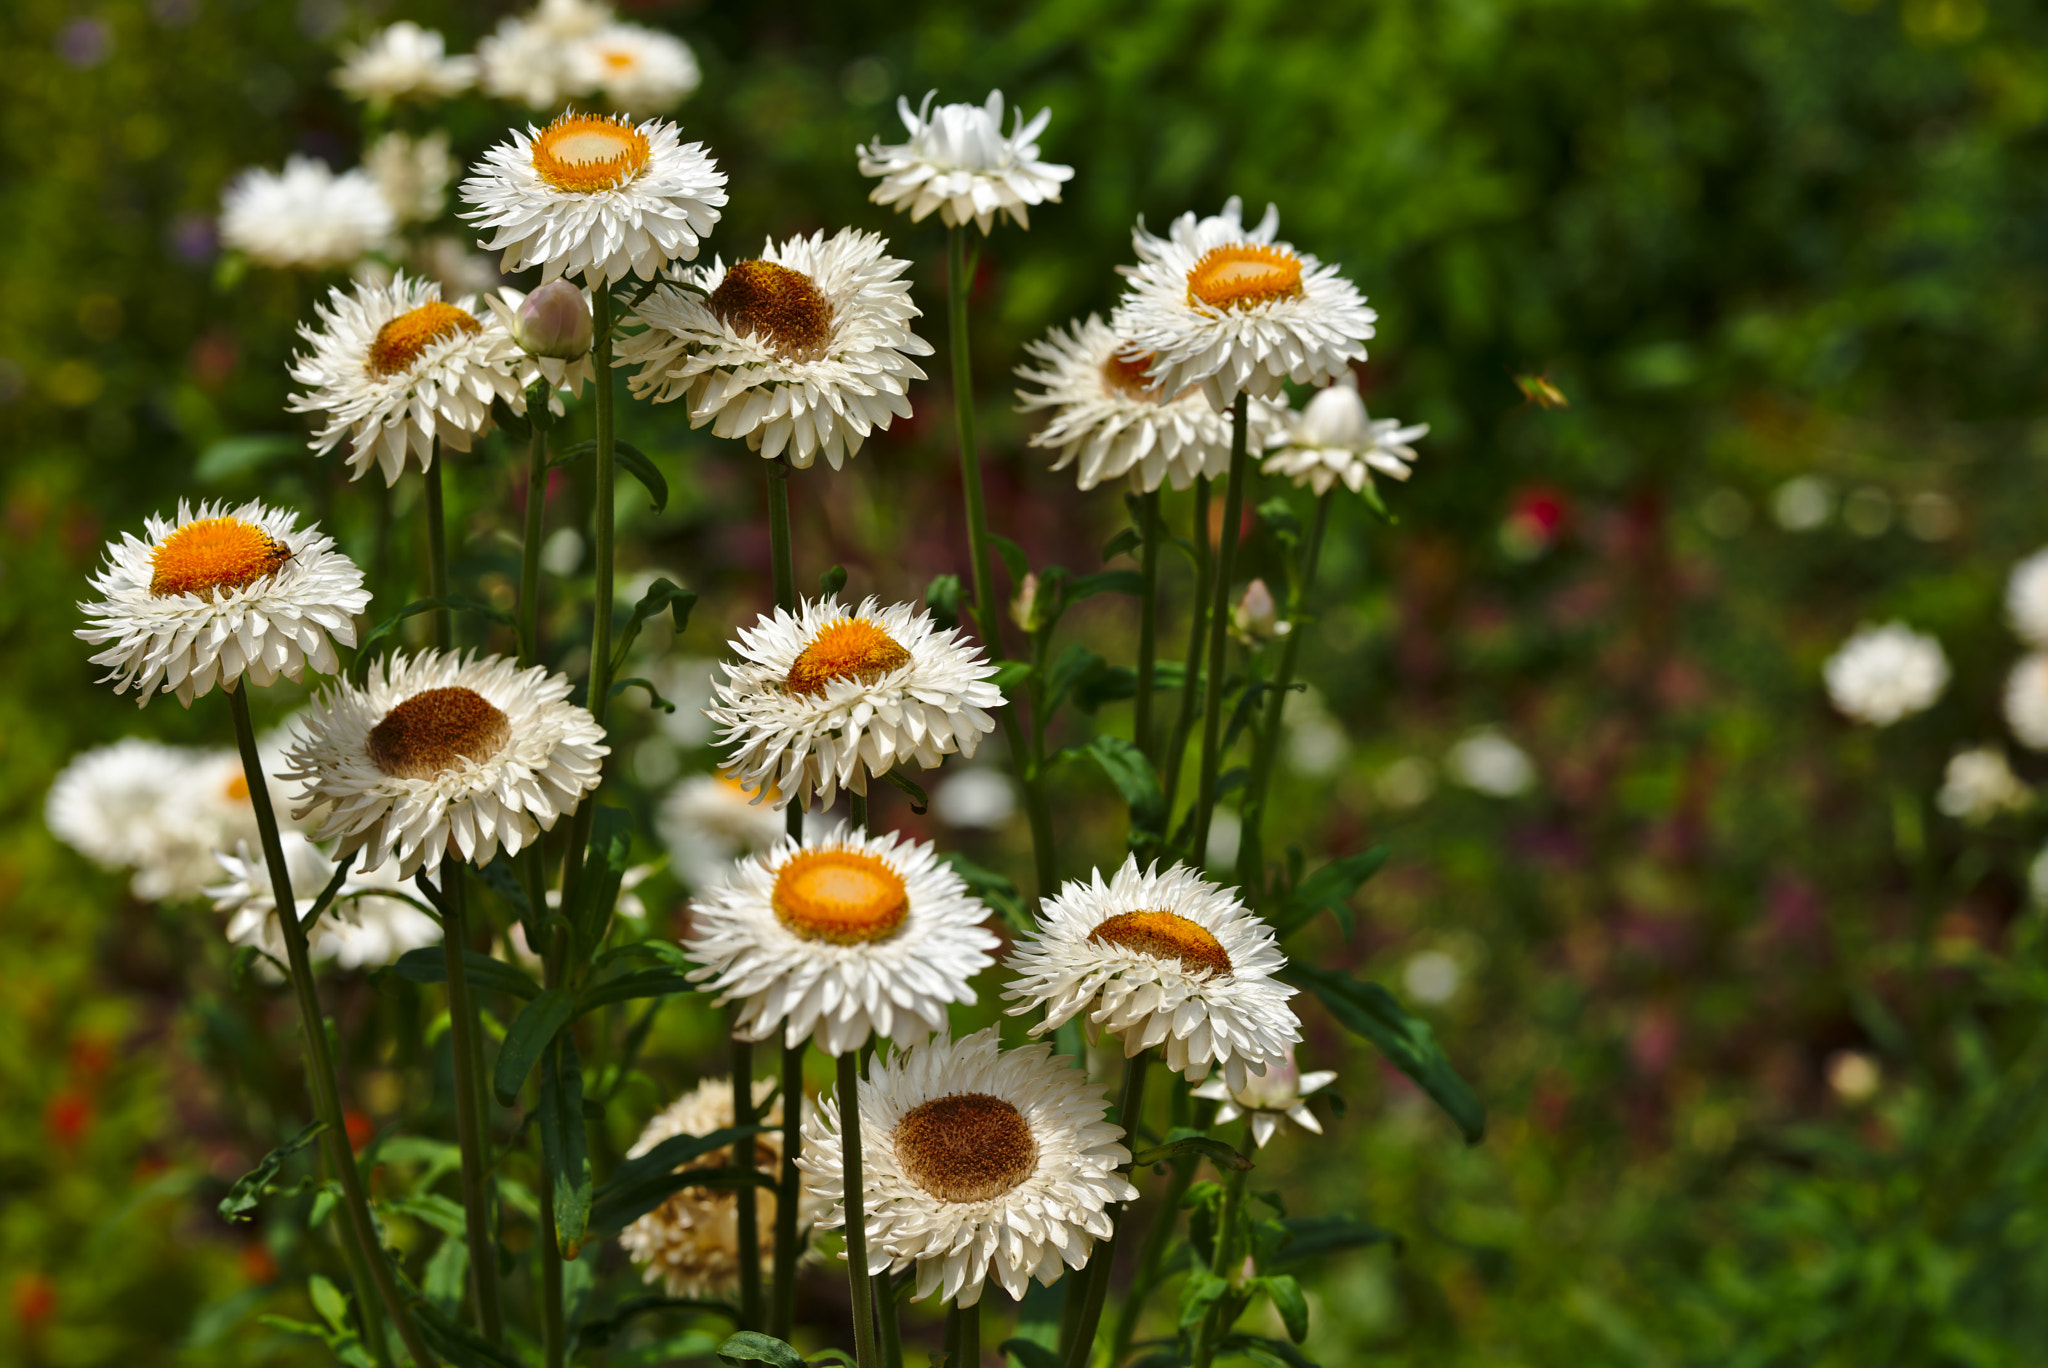 ZEISS Otus 85mm F1.4 sample photo. Daisies photography